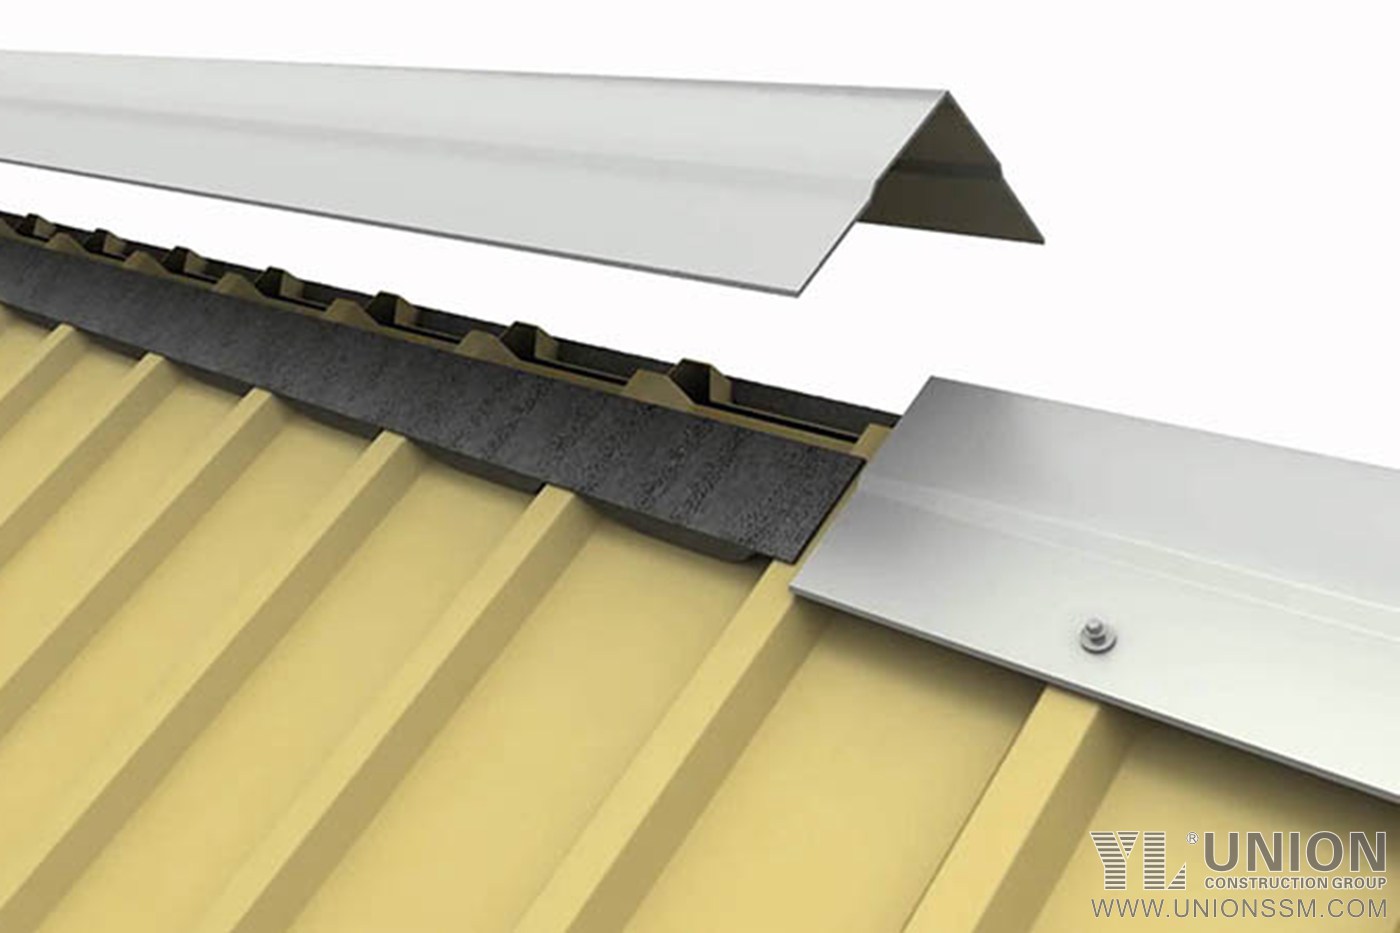 Metal Trim And Flashing For Roofing And Wall